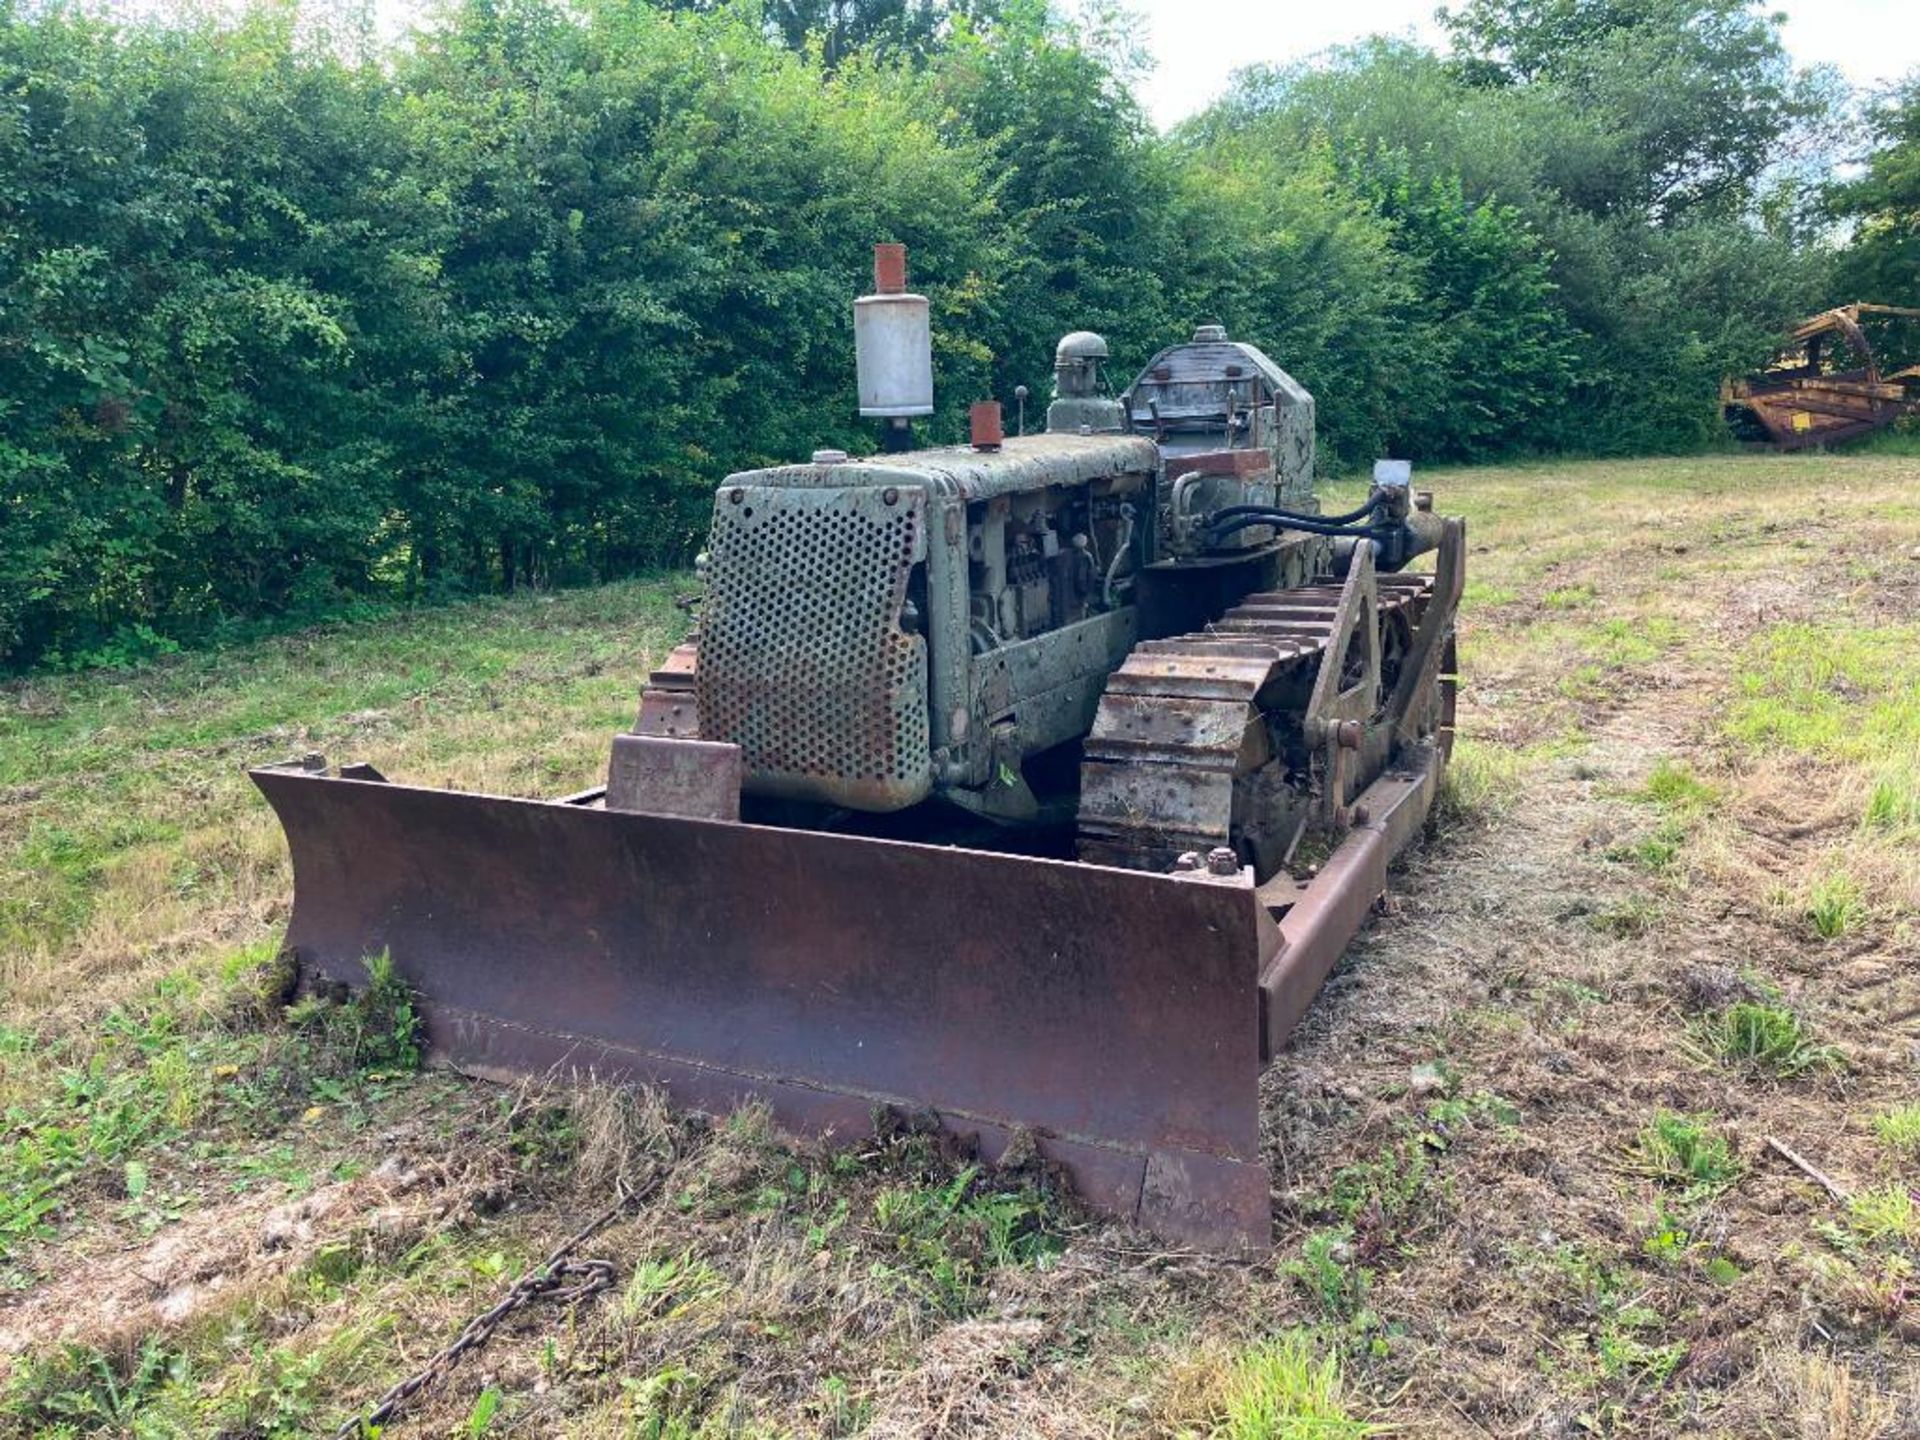 1948 Caterpillar D4 metal tracked crawler with 16" tracks, swinging drawbar, front grading blade and - Image 3 of 13